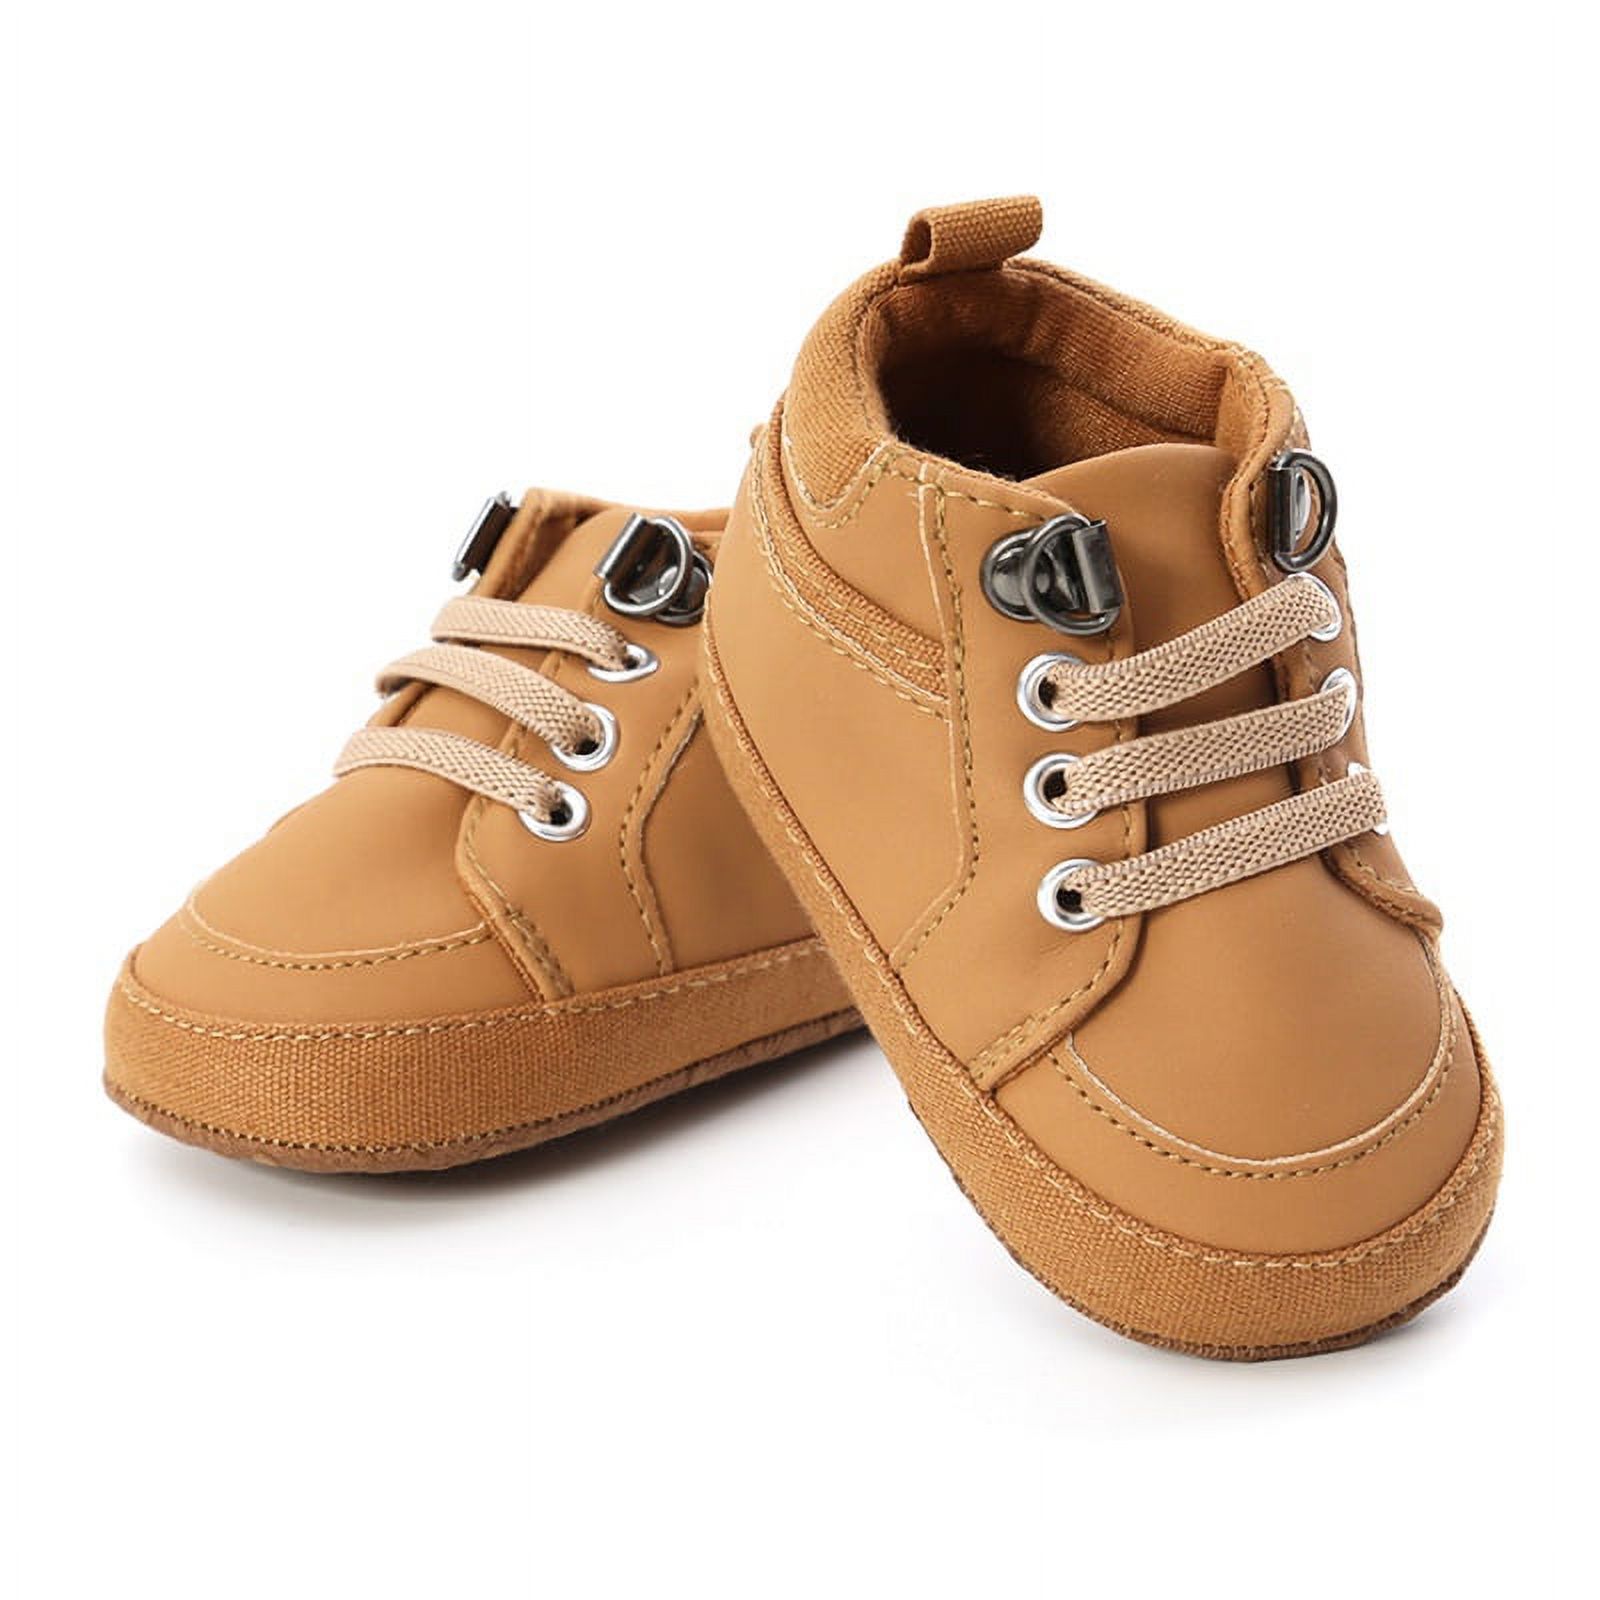 Baby Girls Boys Walking Shoes Toddler Infant First Walker Soft Sole High-Top Ankle Sneakers Newborn Crib Shoe - image 4 of 7